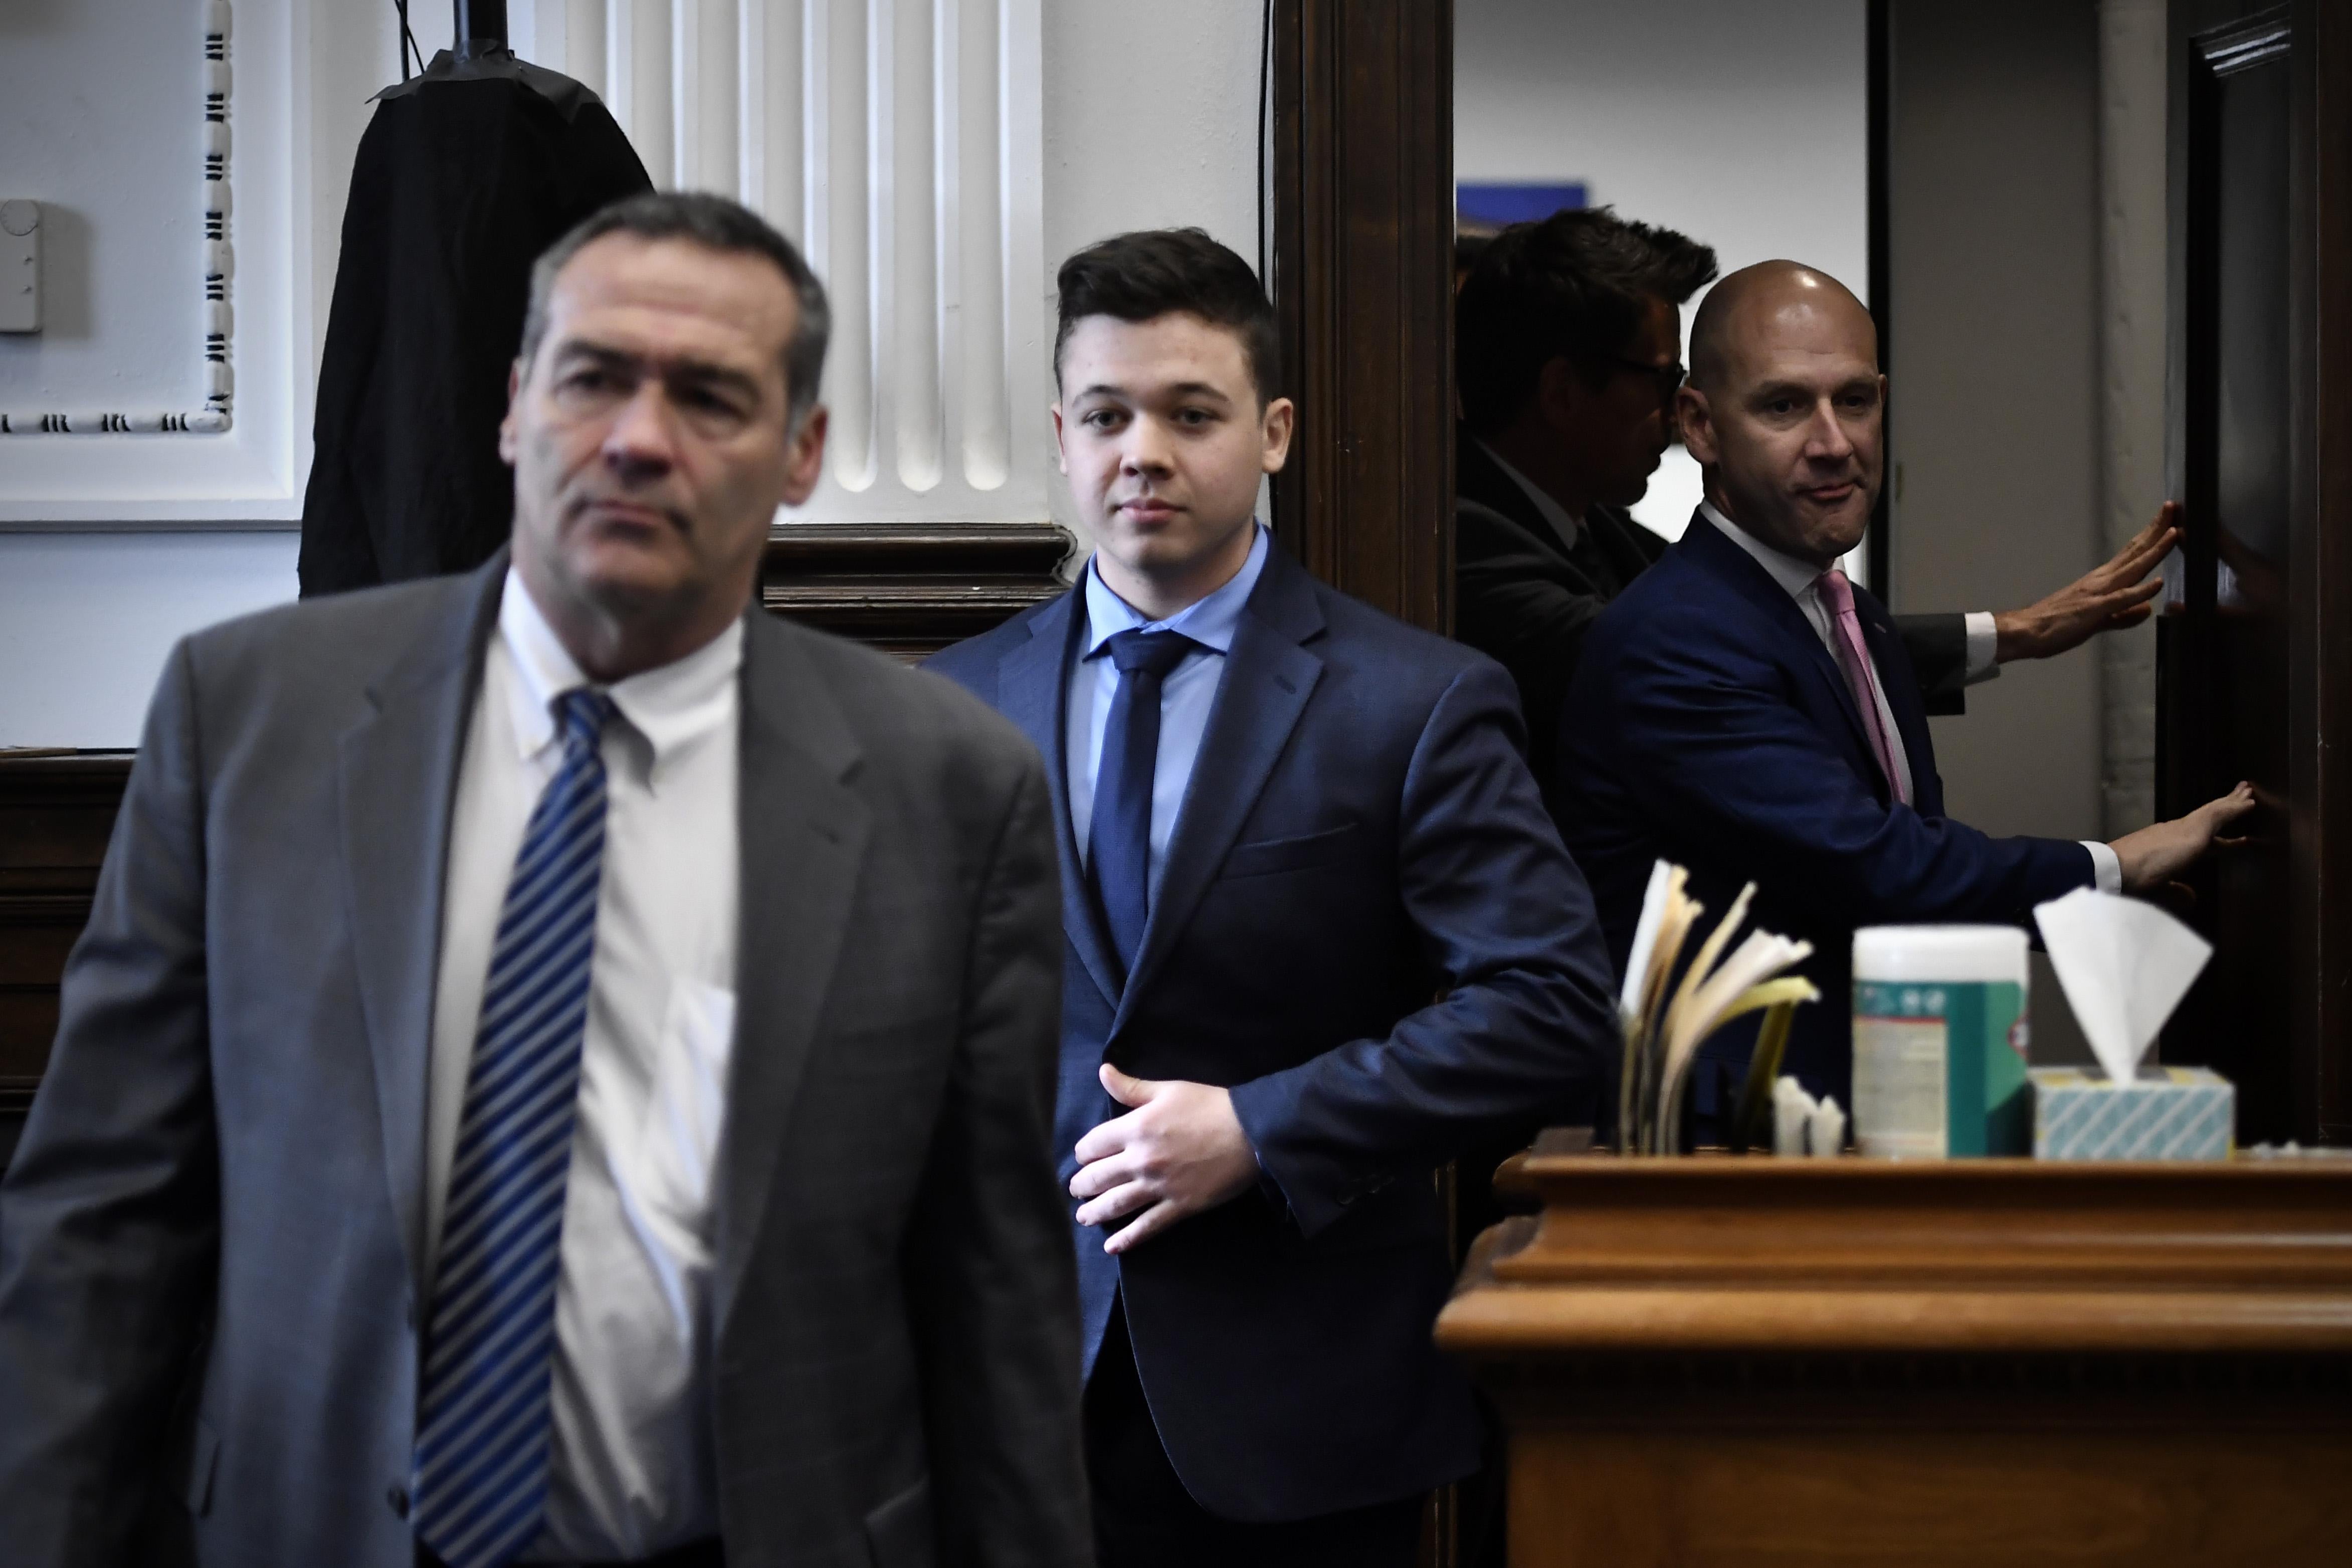 Kyle Rittenhouse enters the courtroom with his attorneys Mark Richards (left) and Corey Chirafisi for a meeting called by Judge Bruce Schroeder at the Kenosha County Courthouse on November 18, 2021 in Kenosha, Wisconsin.